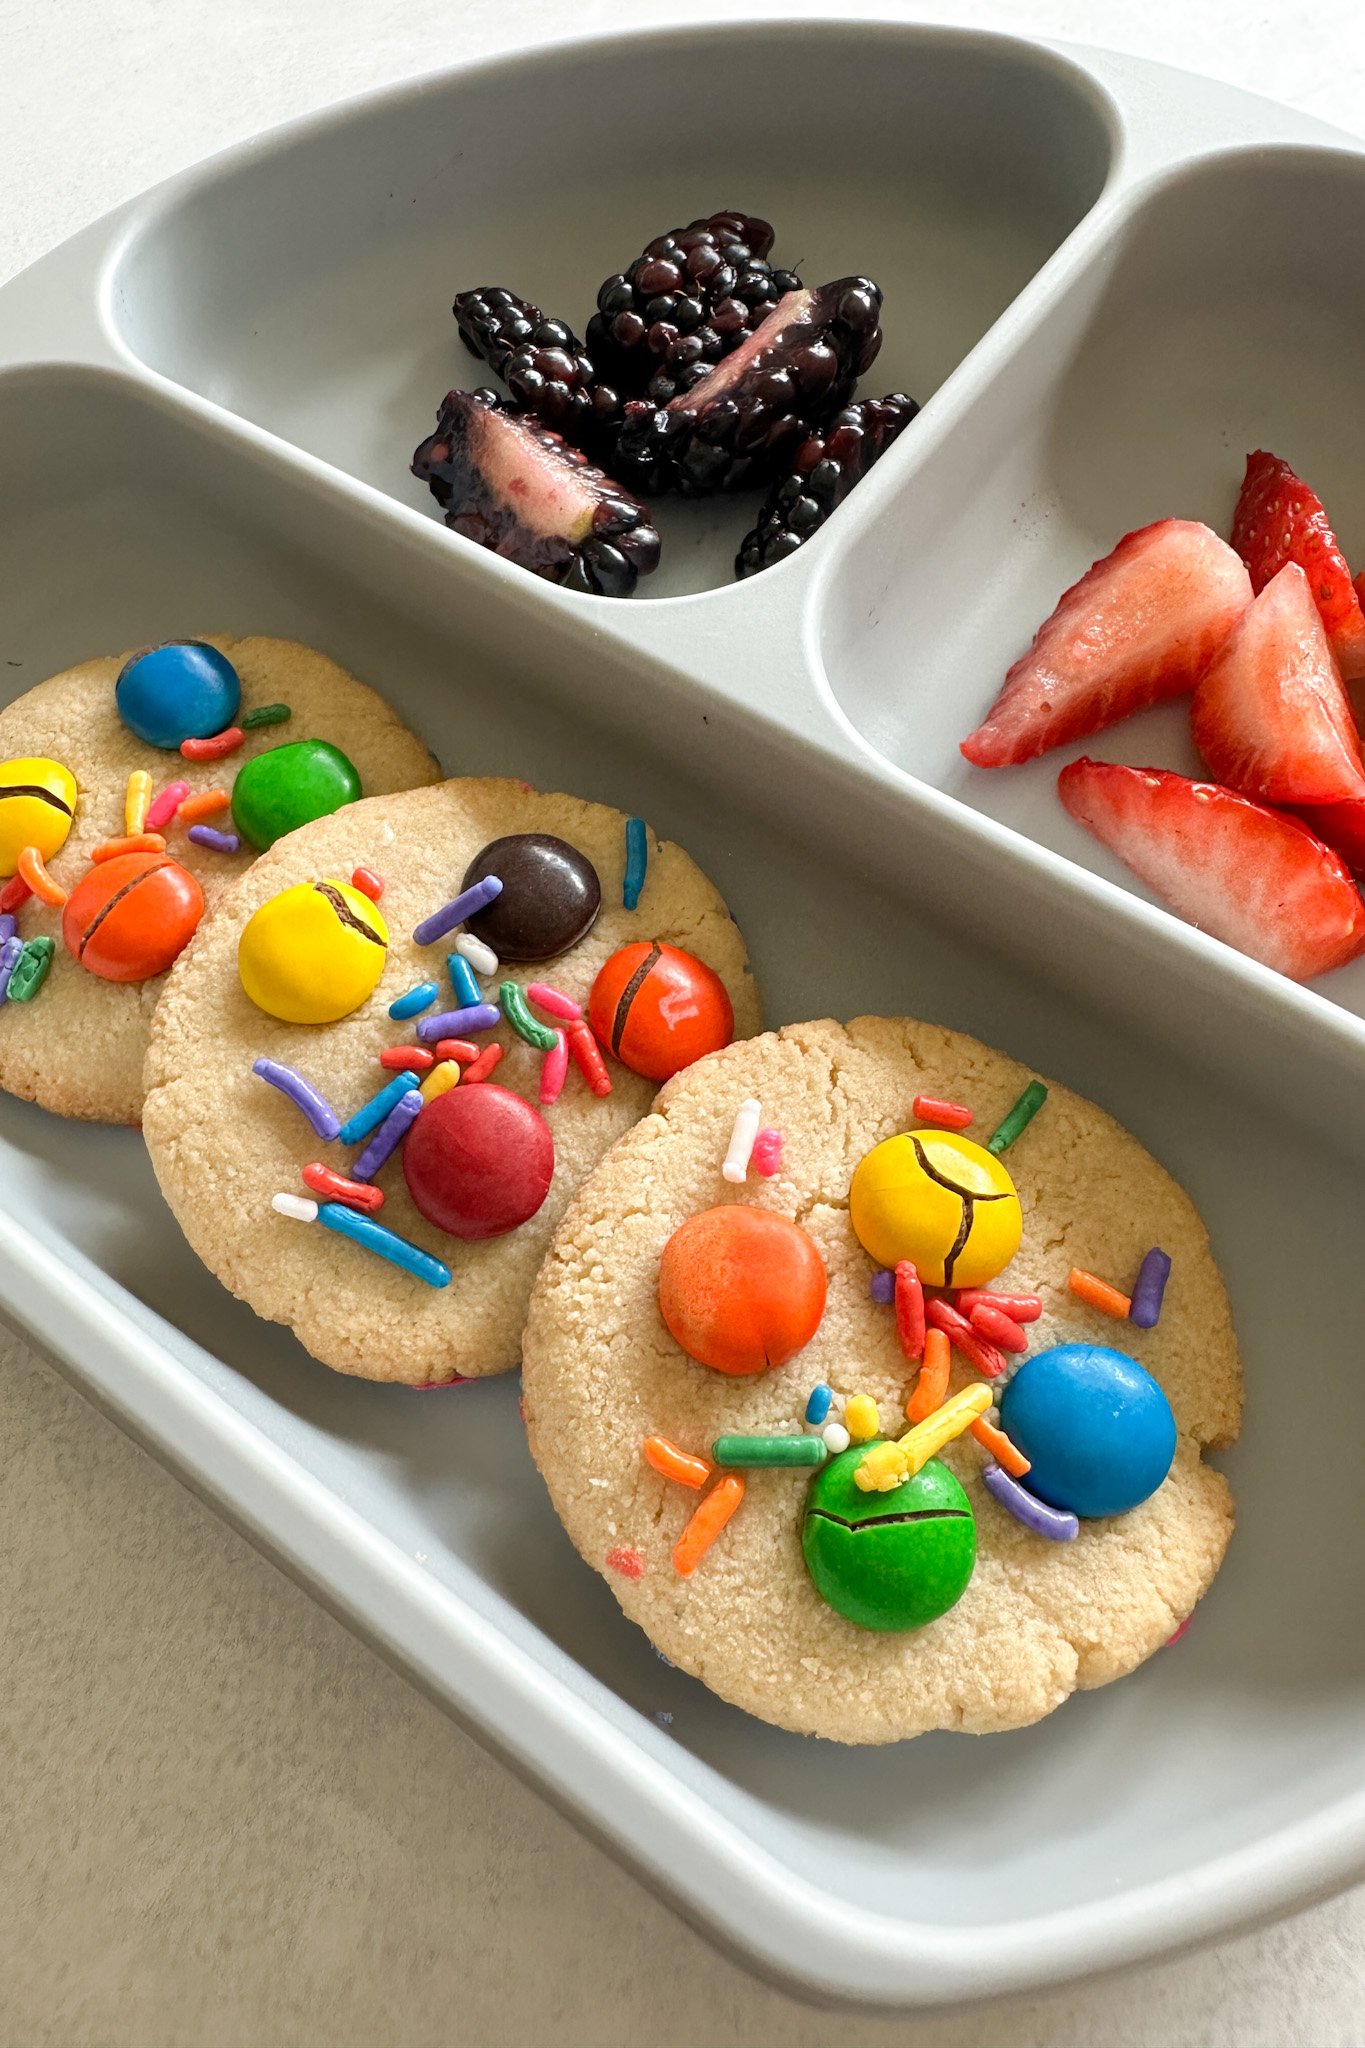 Chocolate chip almond cookies served with fruits.